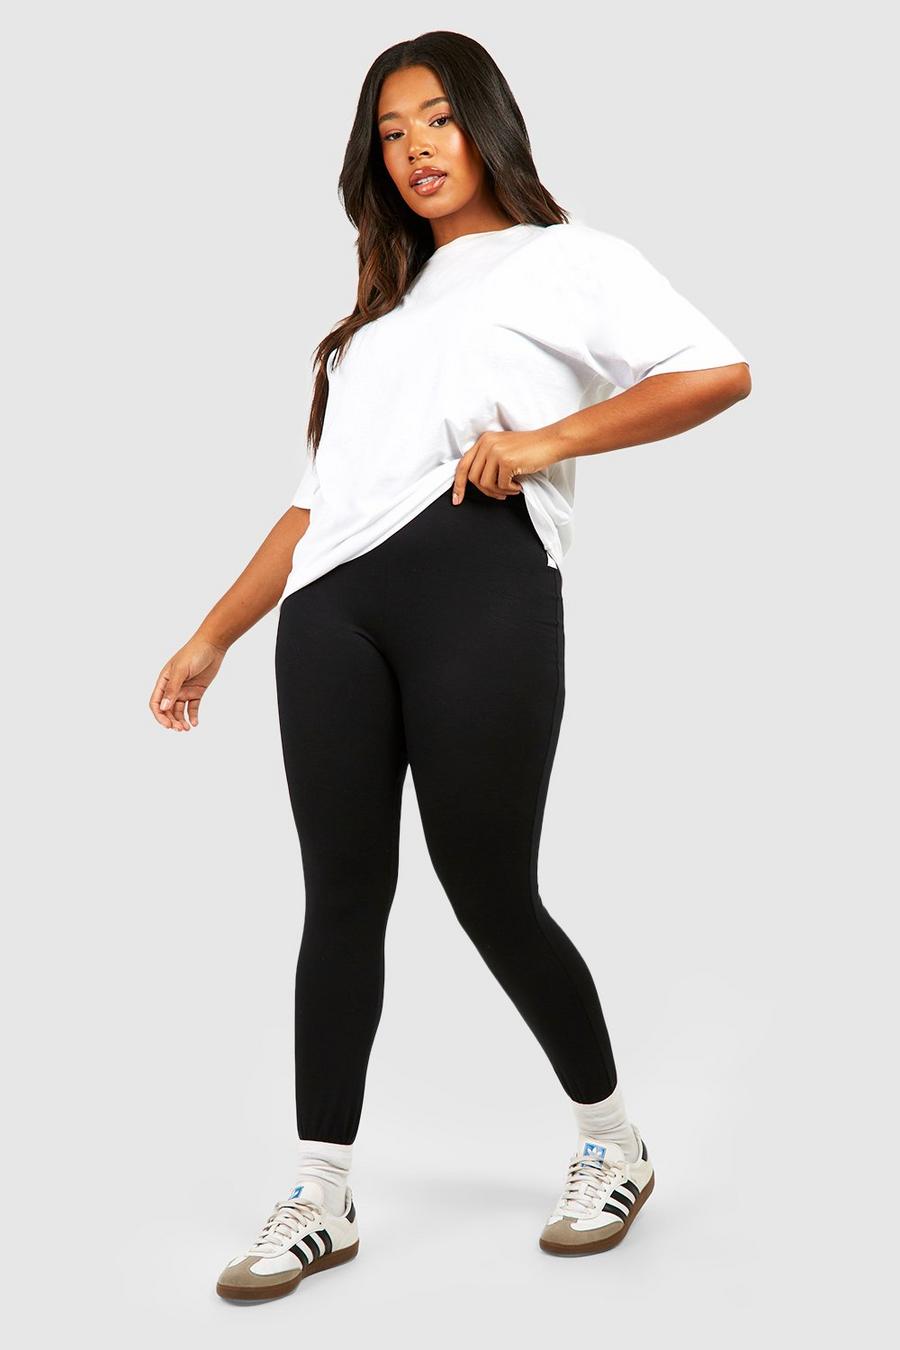 Women's black leggings with mixed stitching